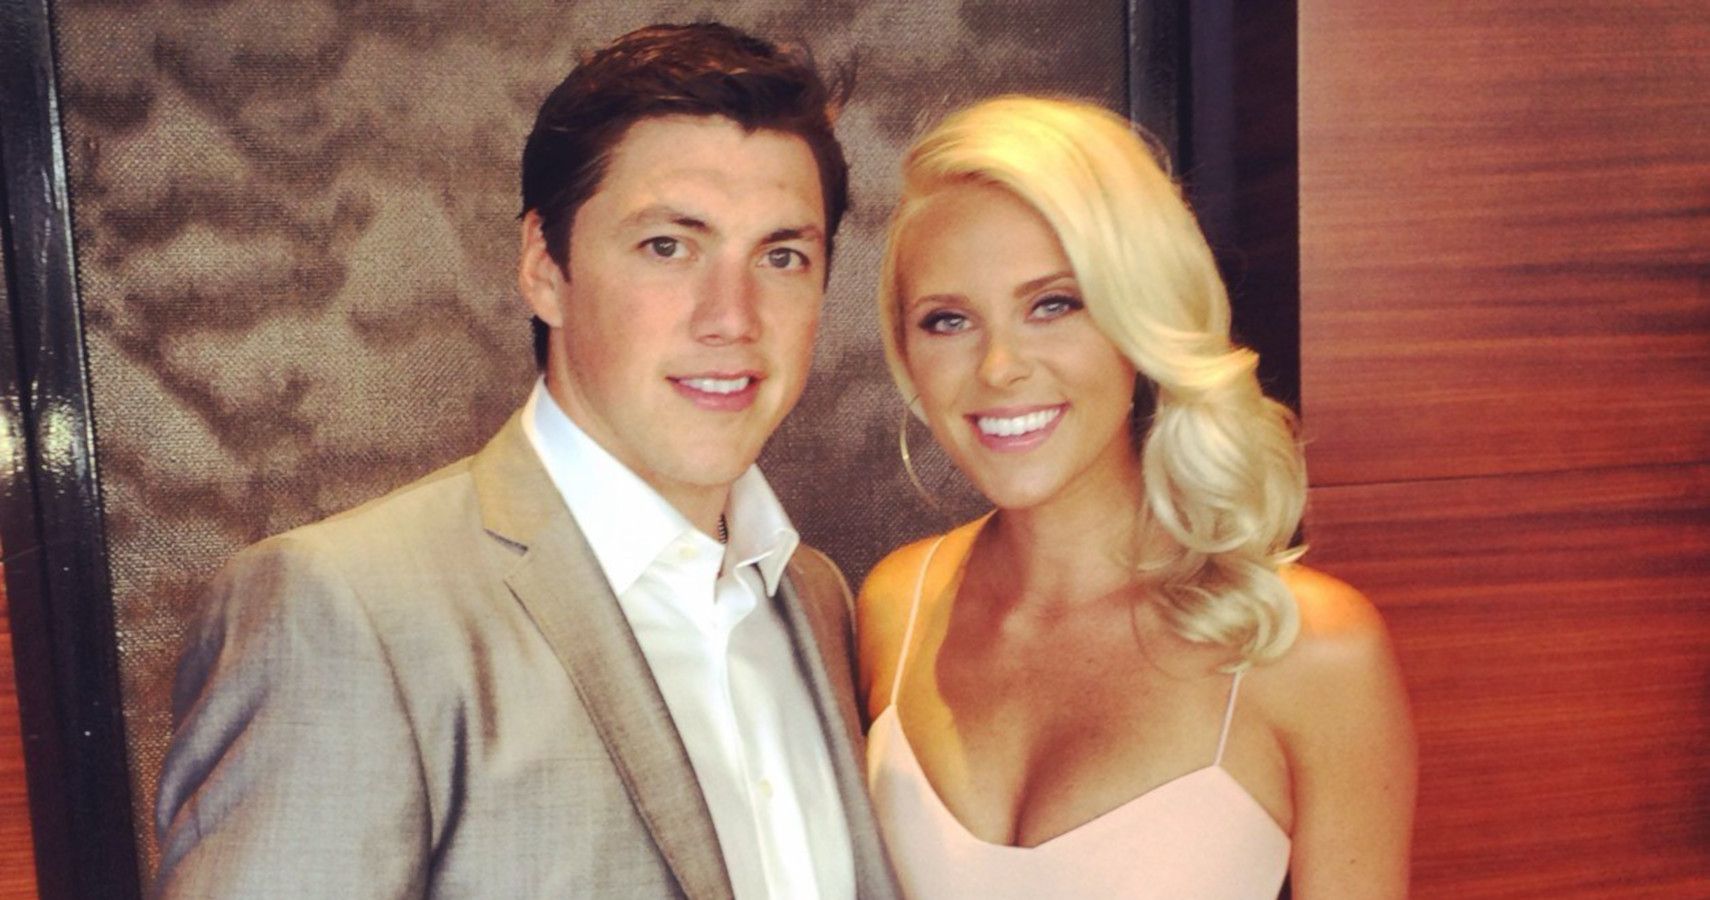 T.J. Oshie's GF Lauren Cosgrove might be more famous than he is